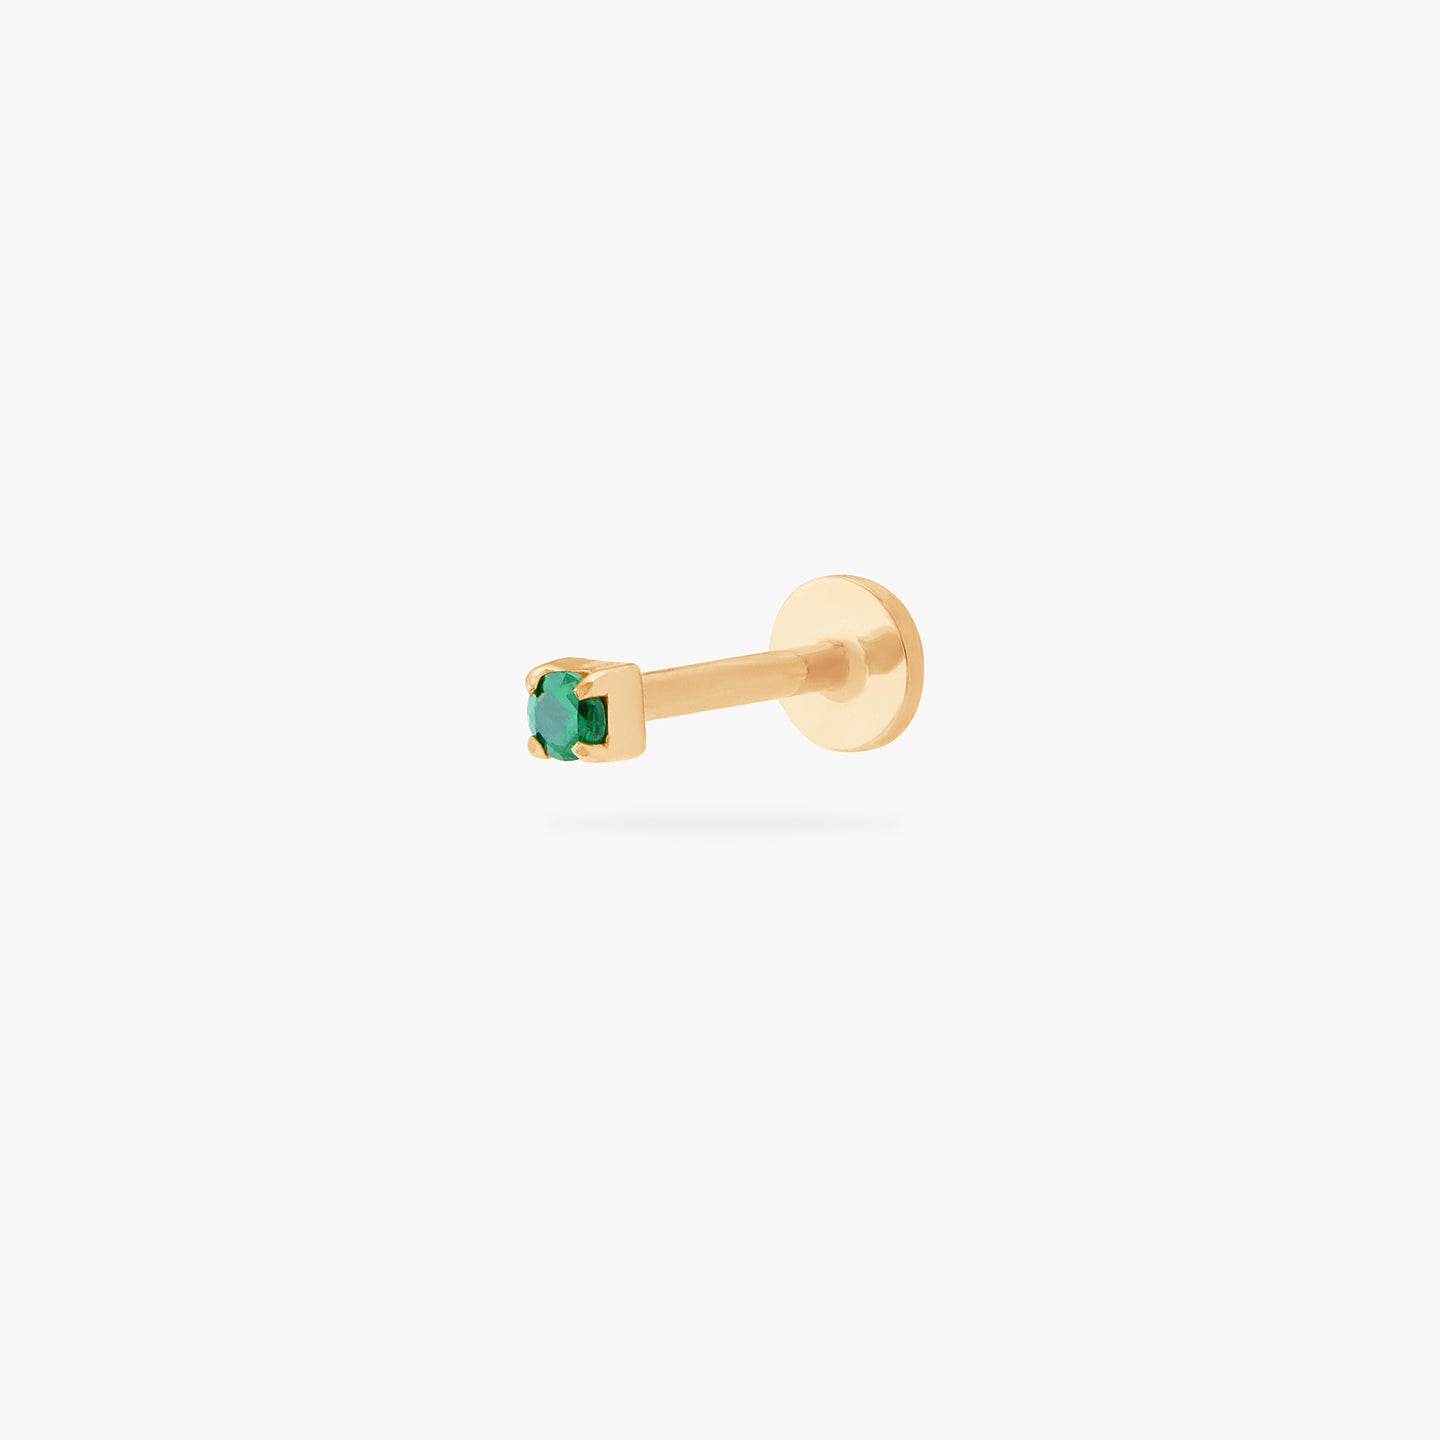 This is an image of a gold/green mini CZ flatback top with a gold circle dic that is engraved with the 